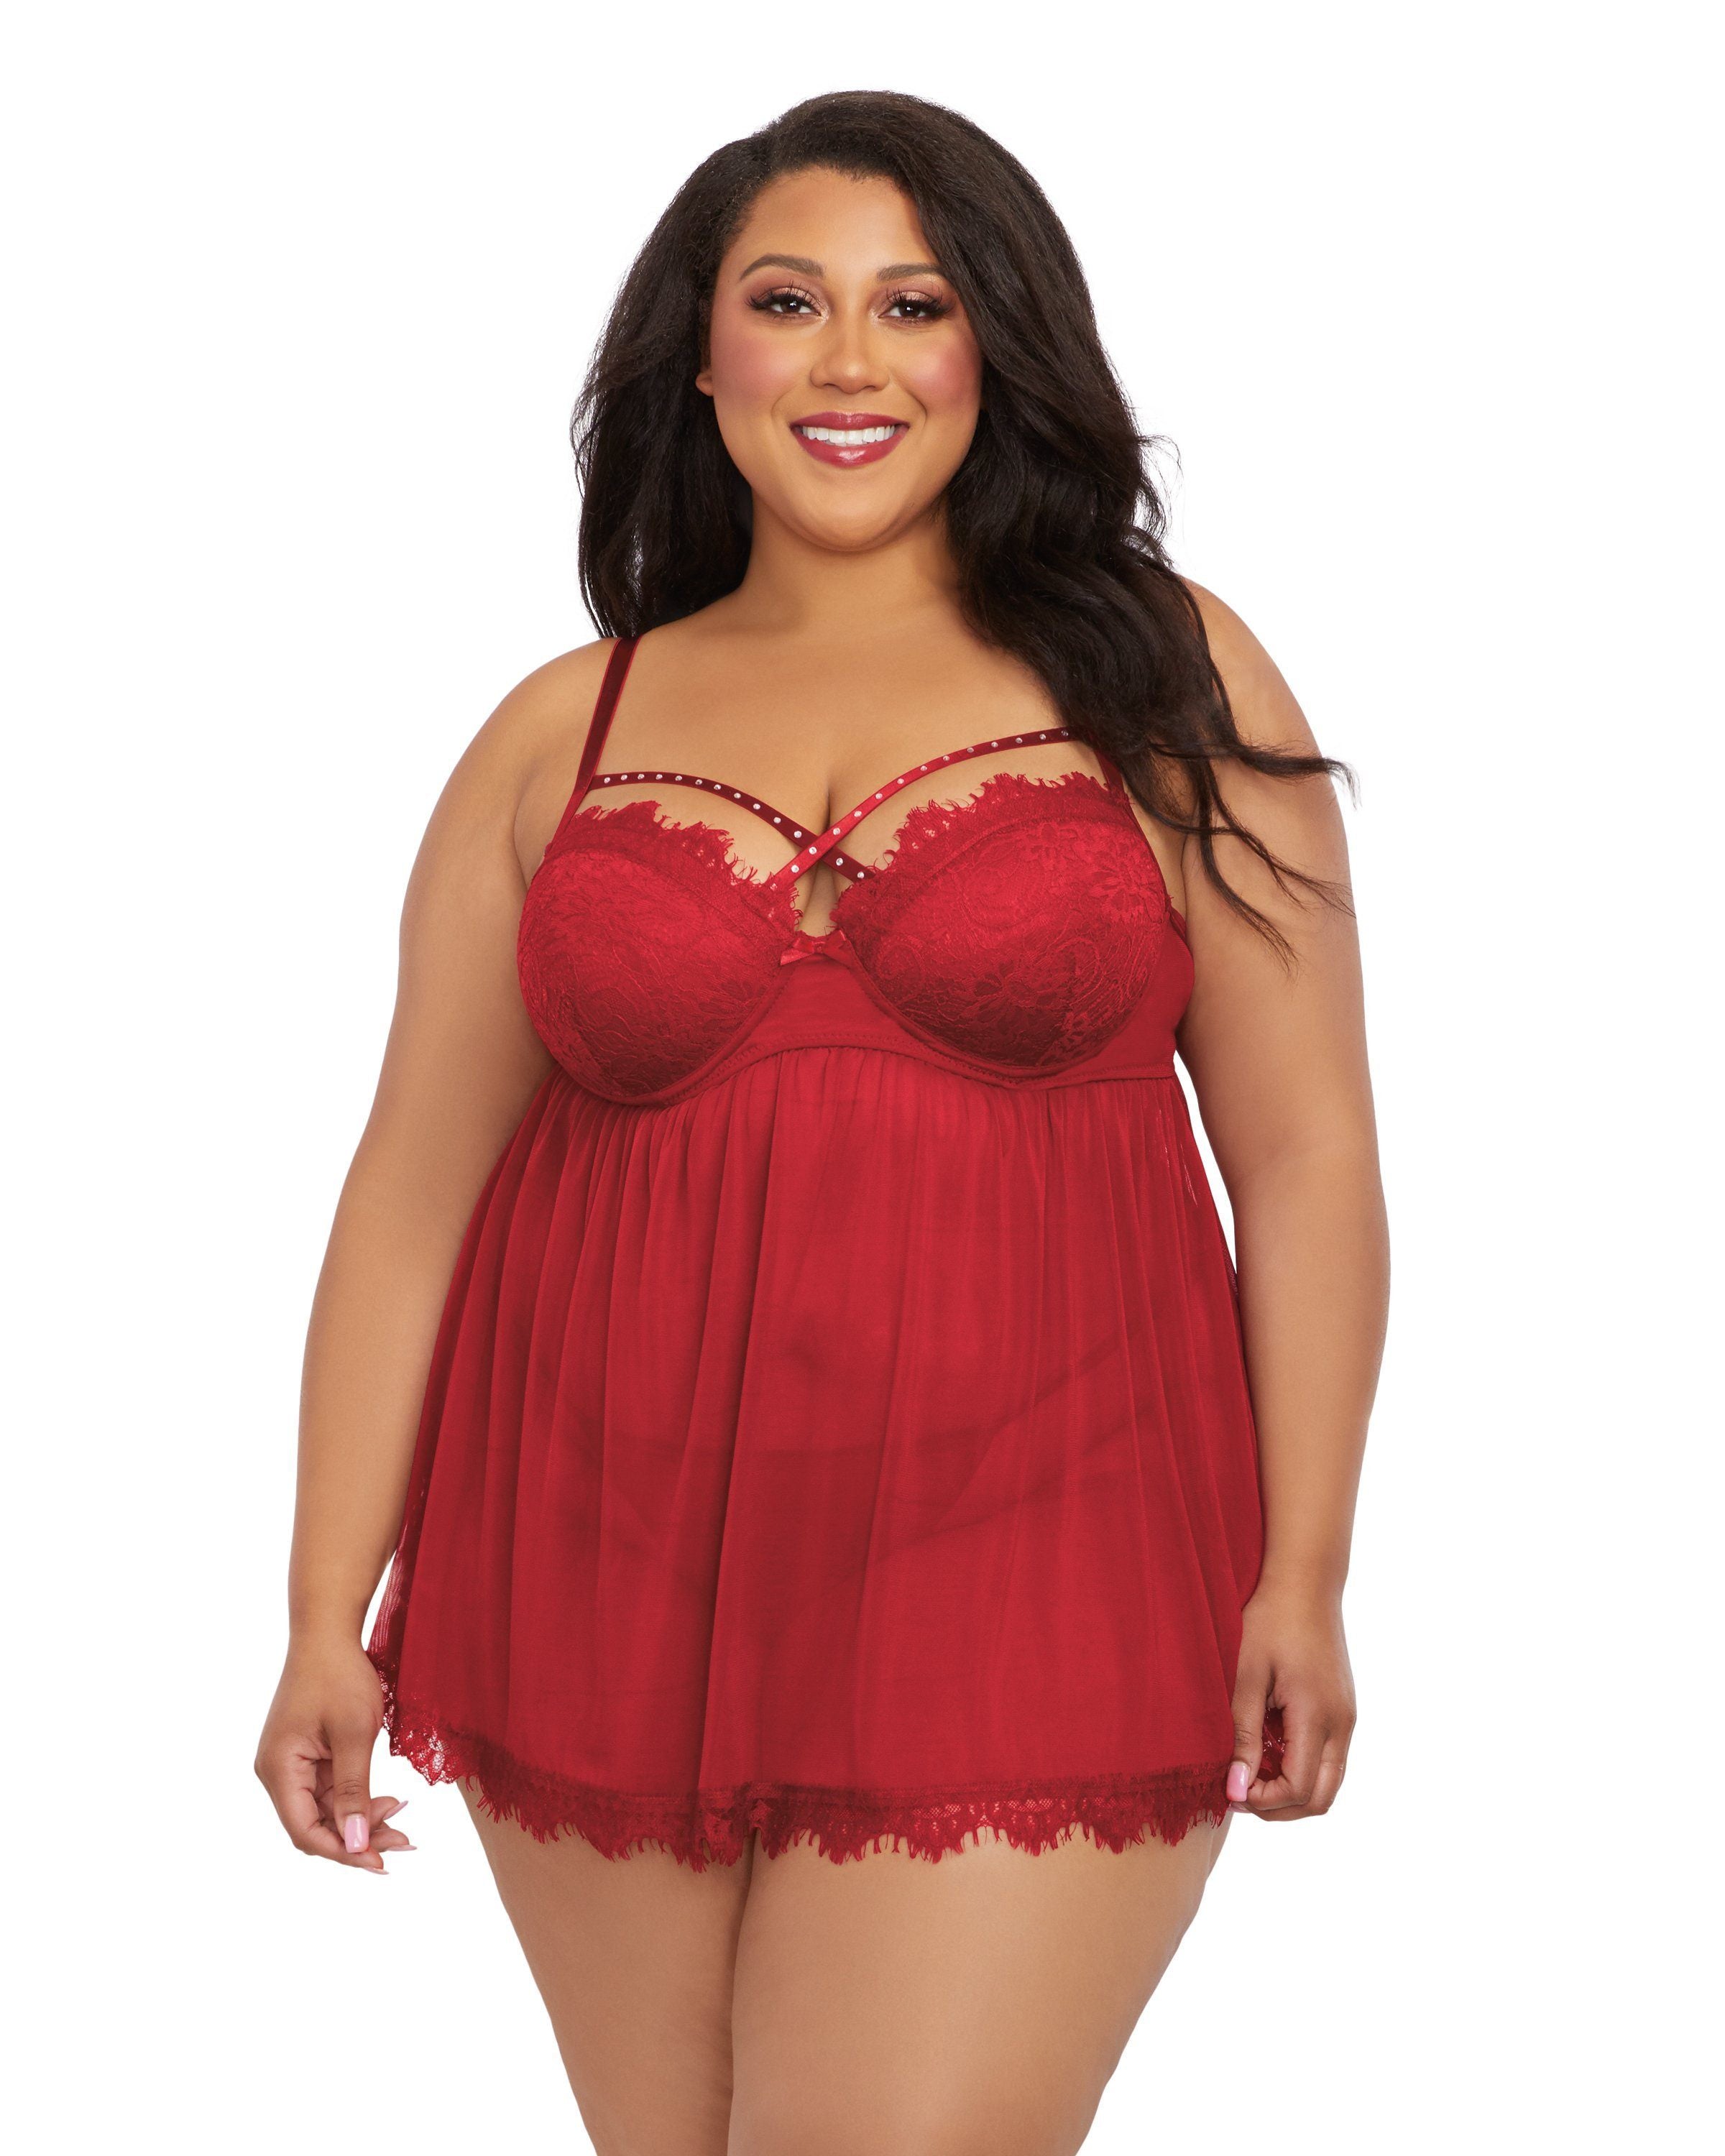 Dreamgirl Plus Size Underwire Push Up Cup Babydoll with Stretch Mesh Skirt